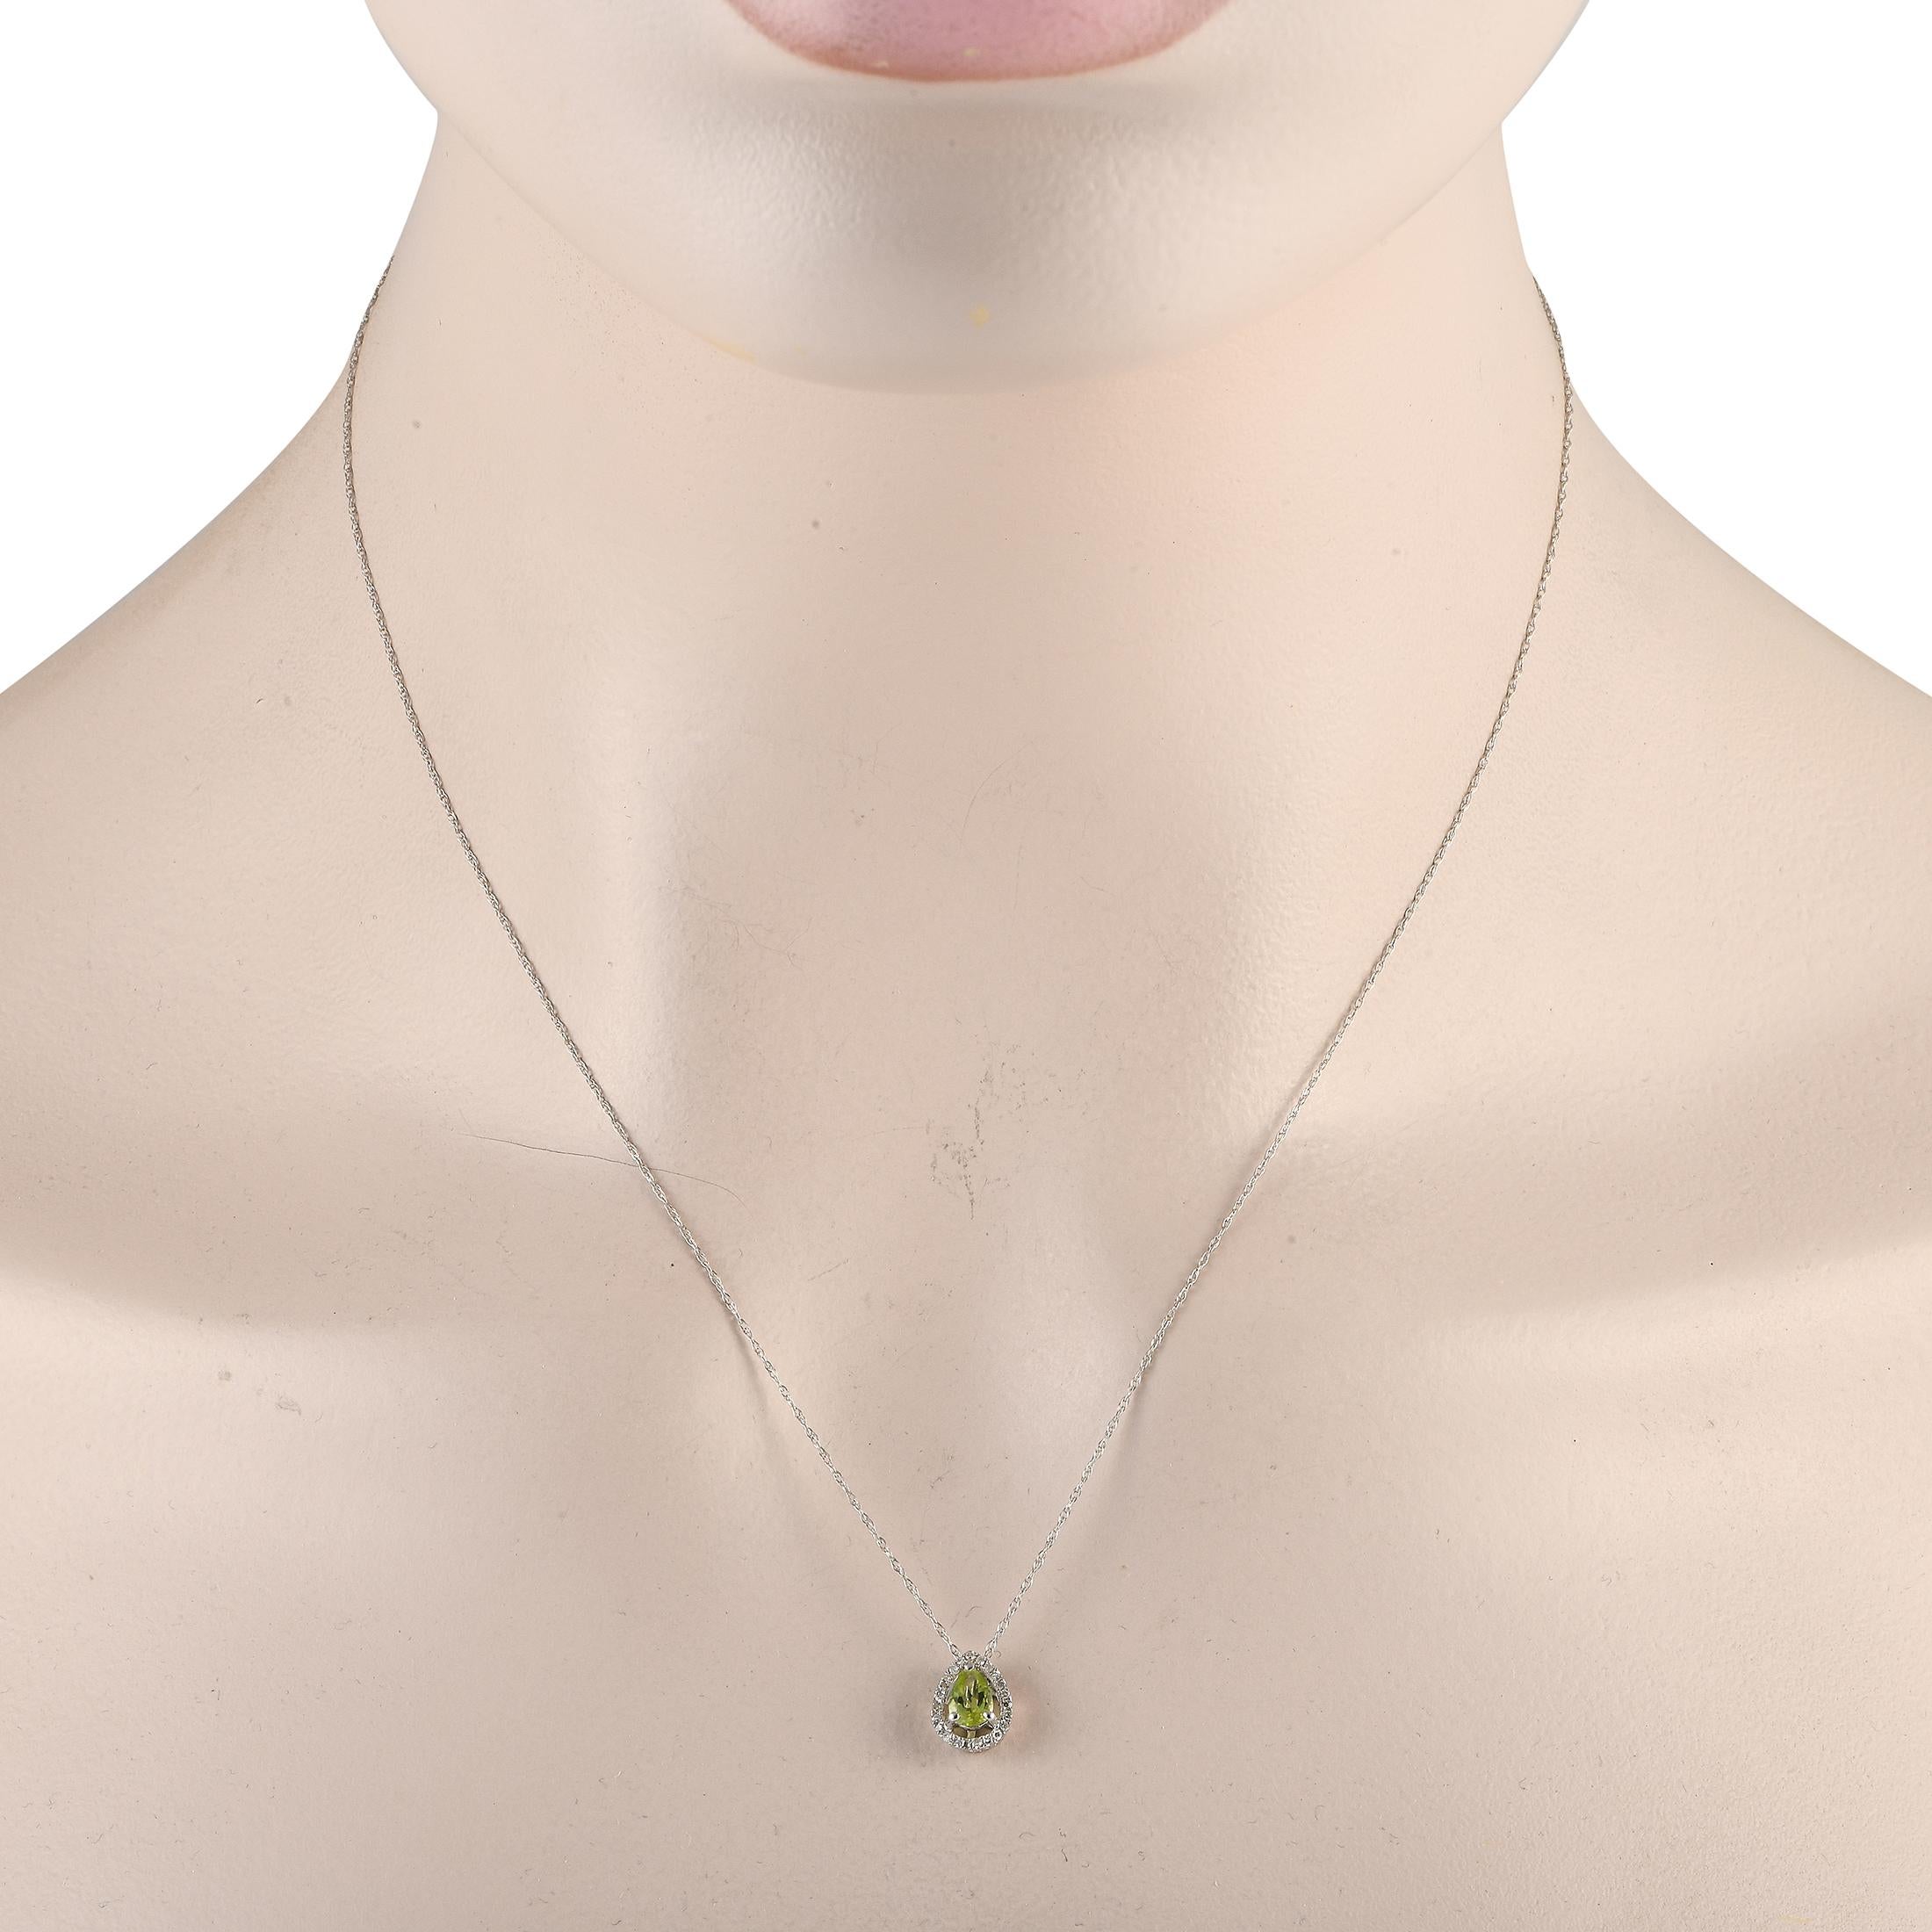 A stunning Peridot center stone and Diamond accents totaling 0.07 carats come together in perfect harmony on this elegant necklace. Crafted from 14K White Gold, this pieces pendant measures 0.45 long by 0.25 wide and is suspended from an 18